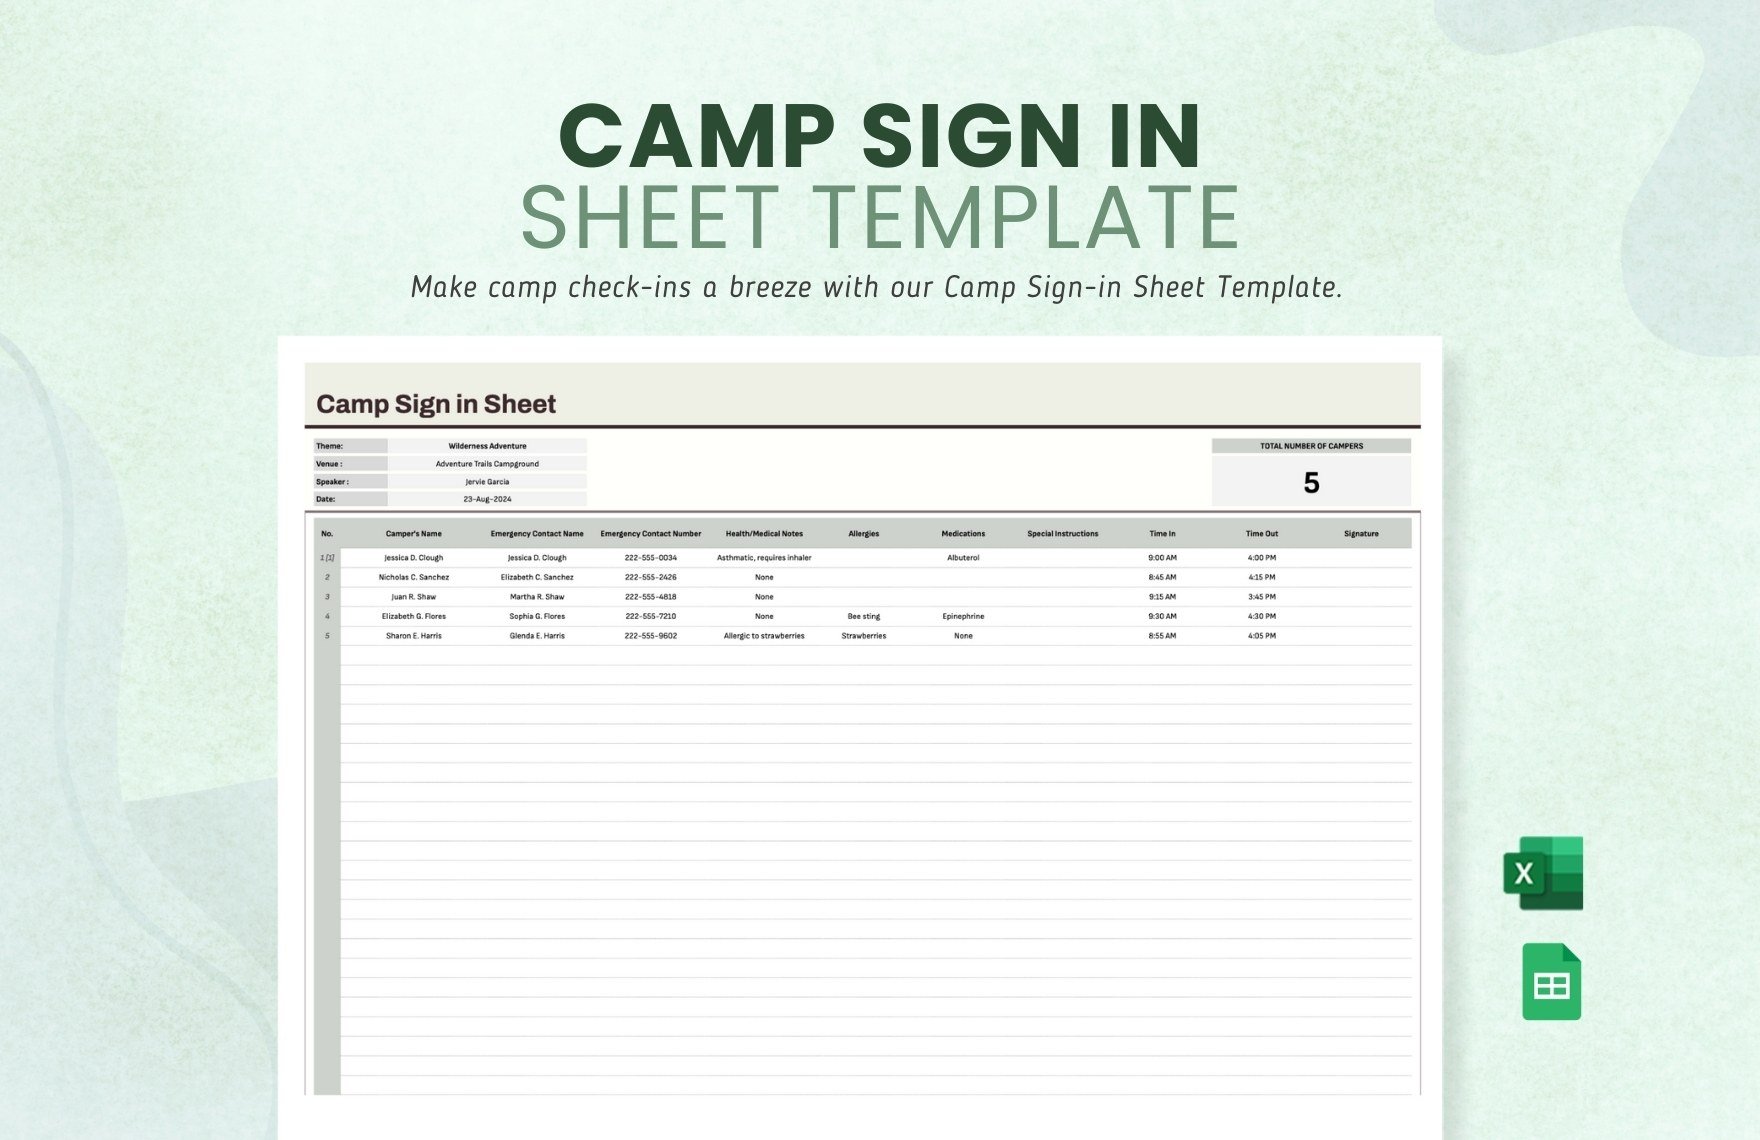 Camp Sign in Sheet Template in Excel, Google Sheets